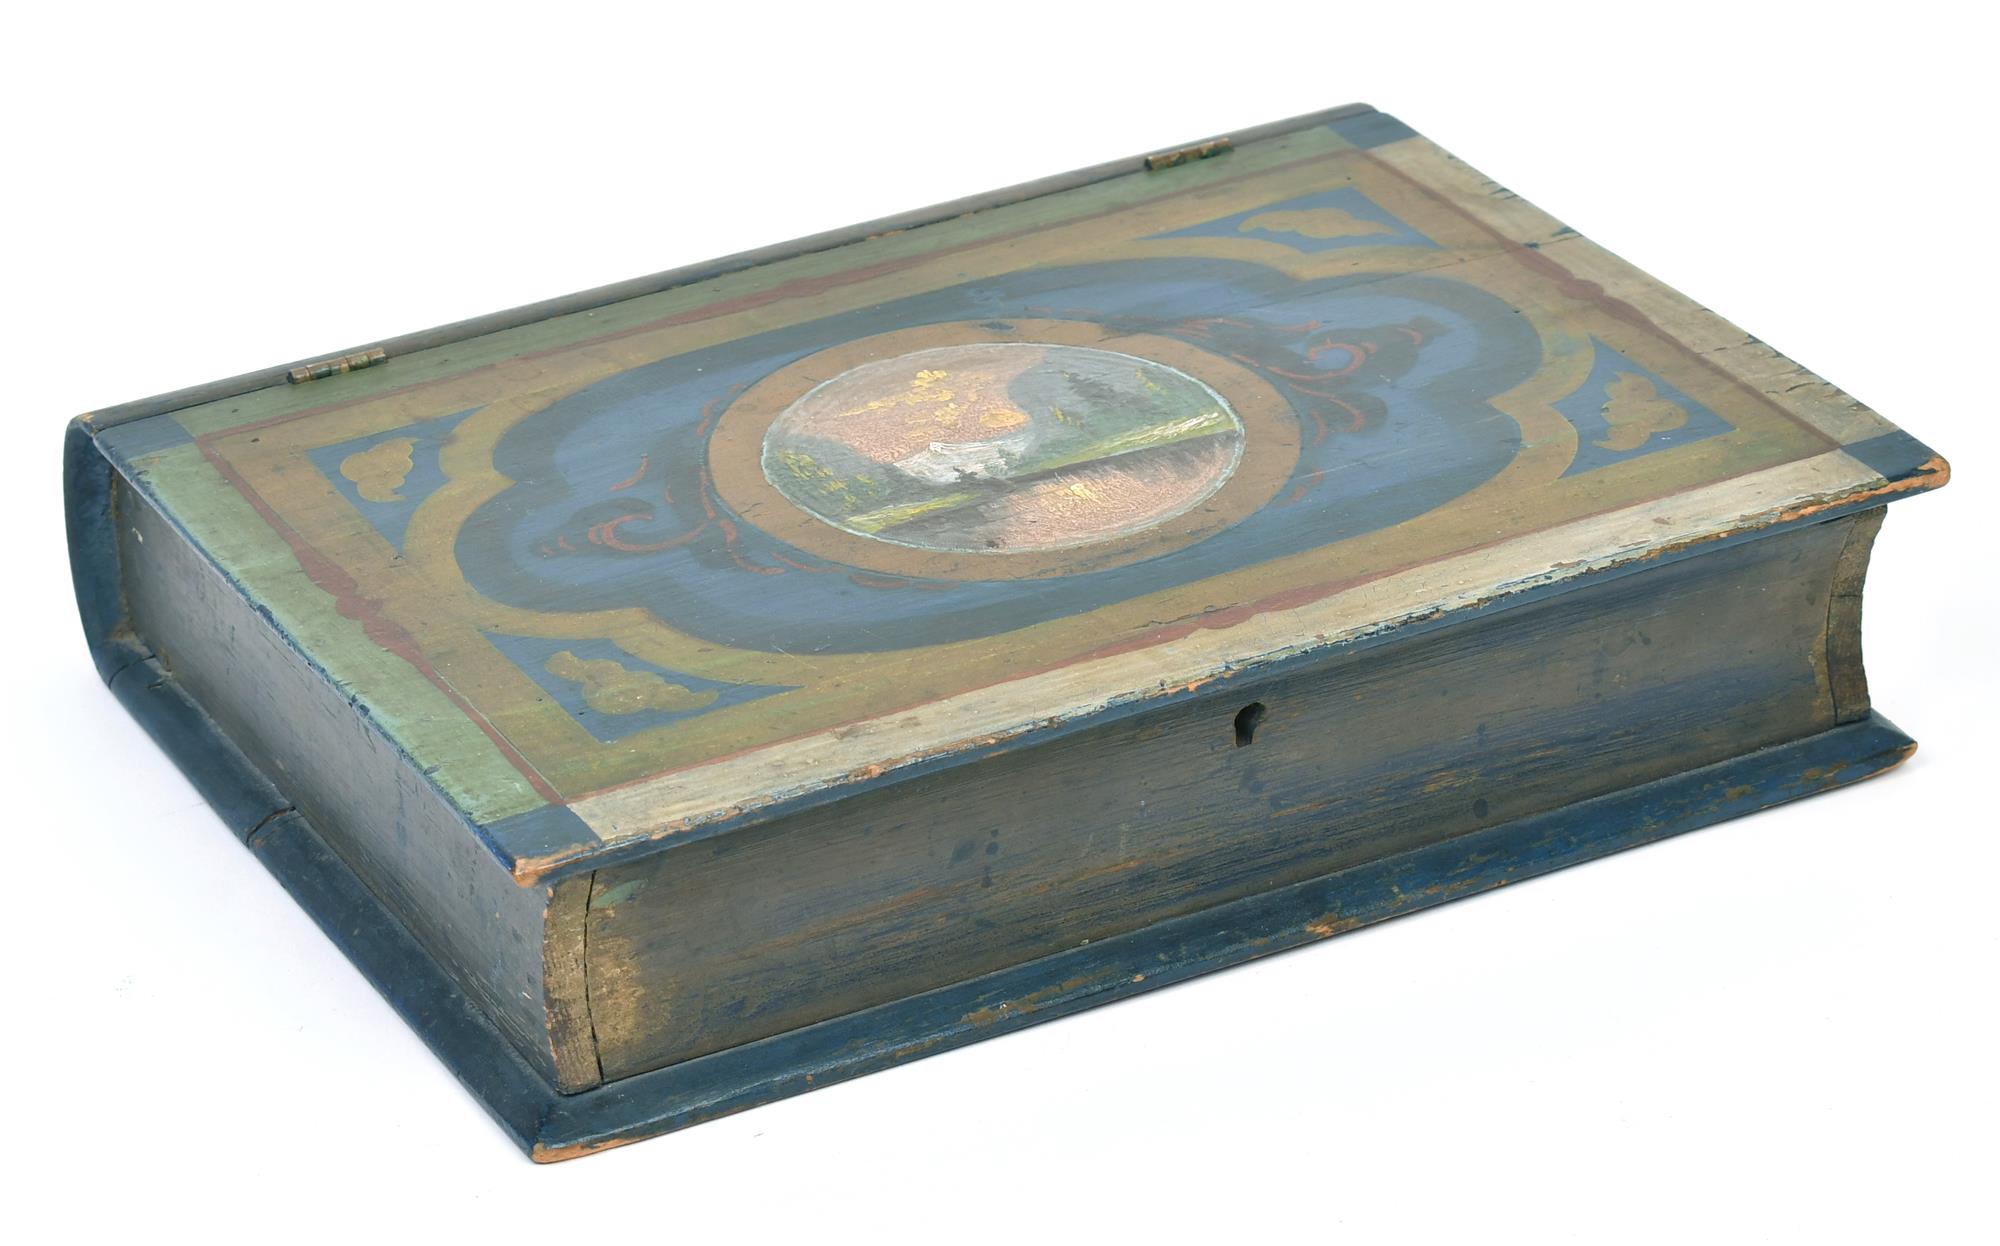 LATE 19TH C. PAINTED BOOK BOX.